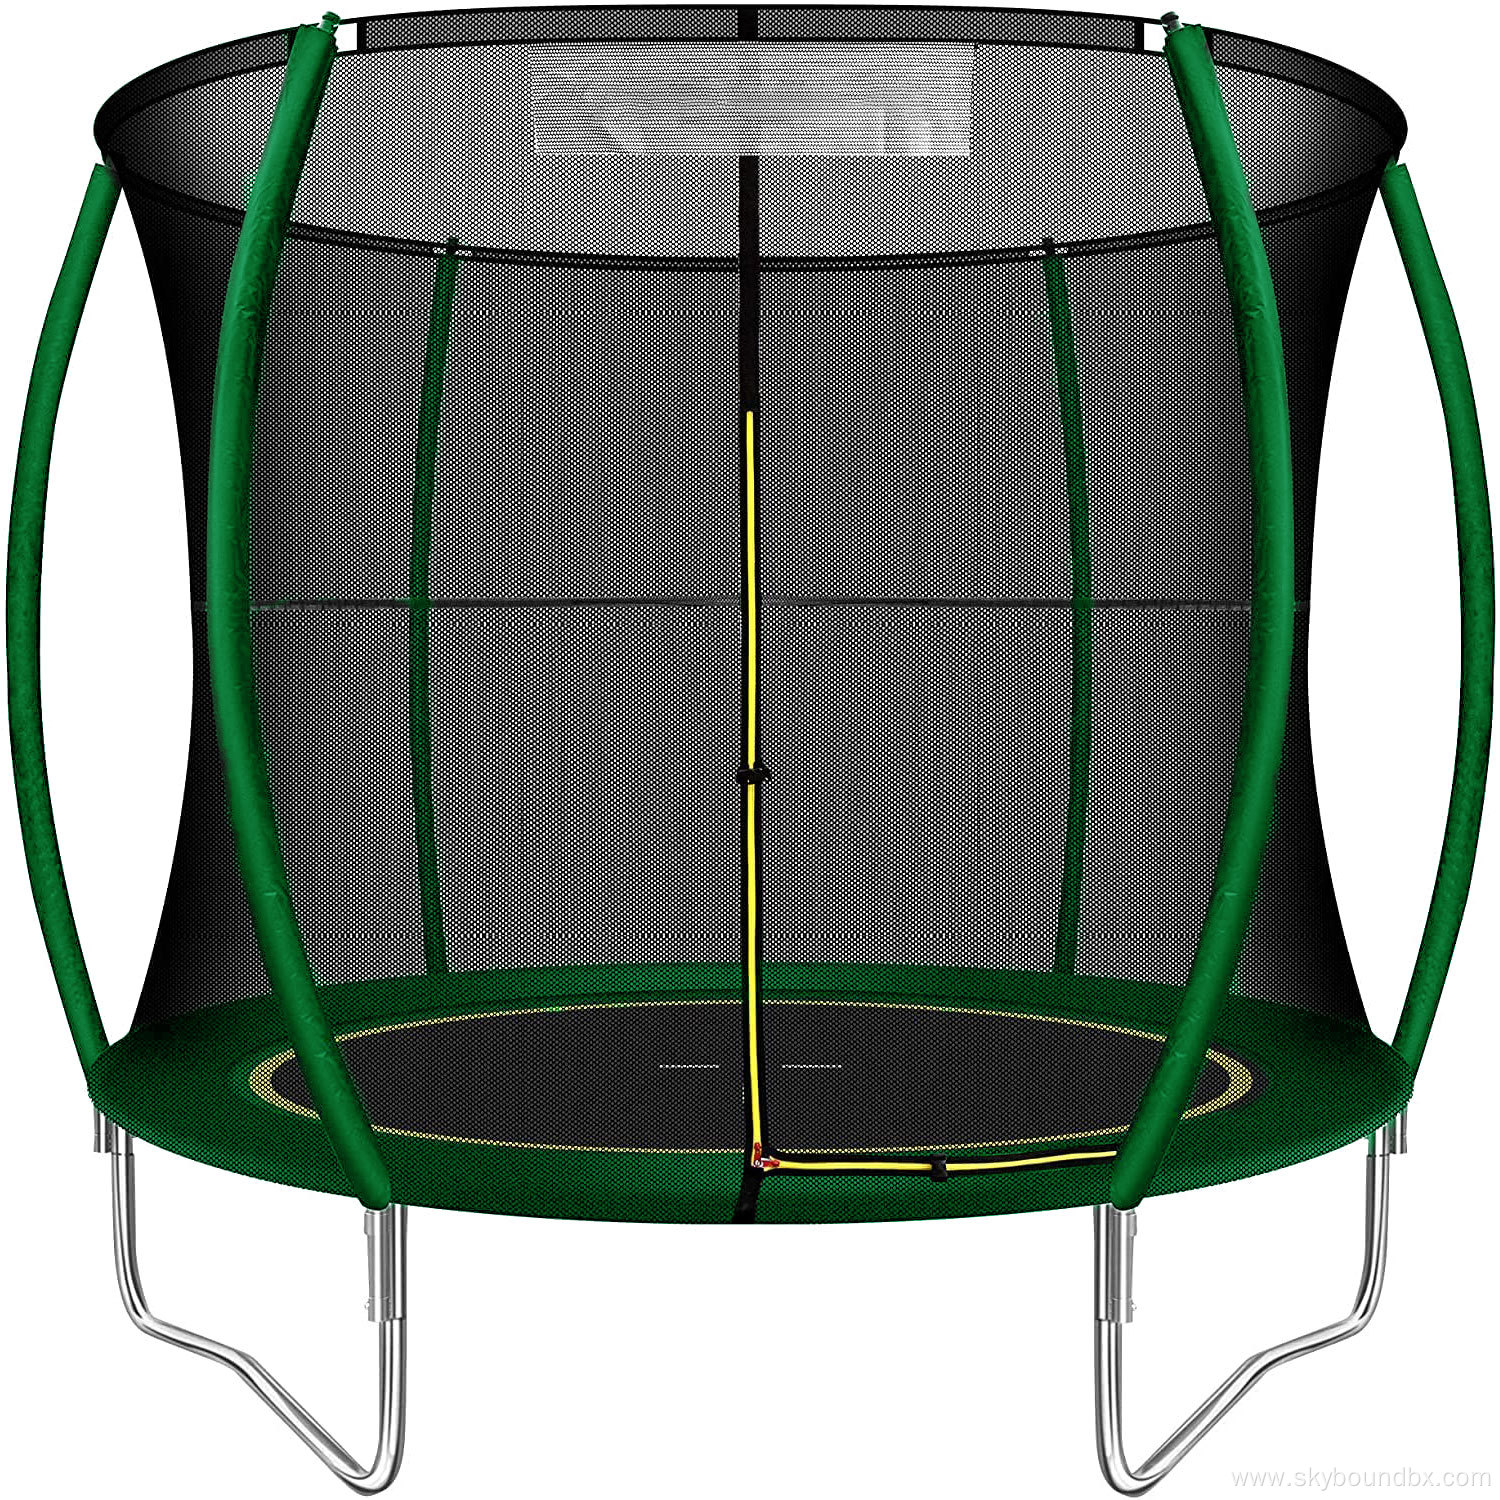 baby 8 feet smart trampolines with net